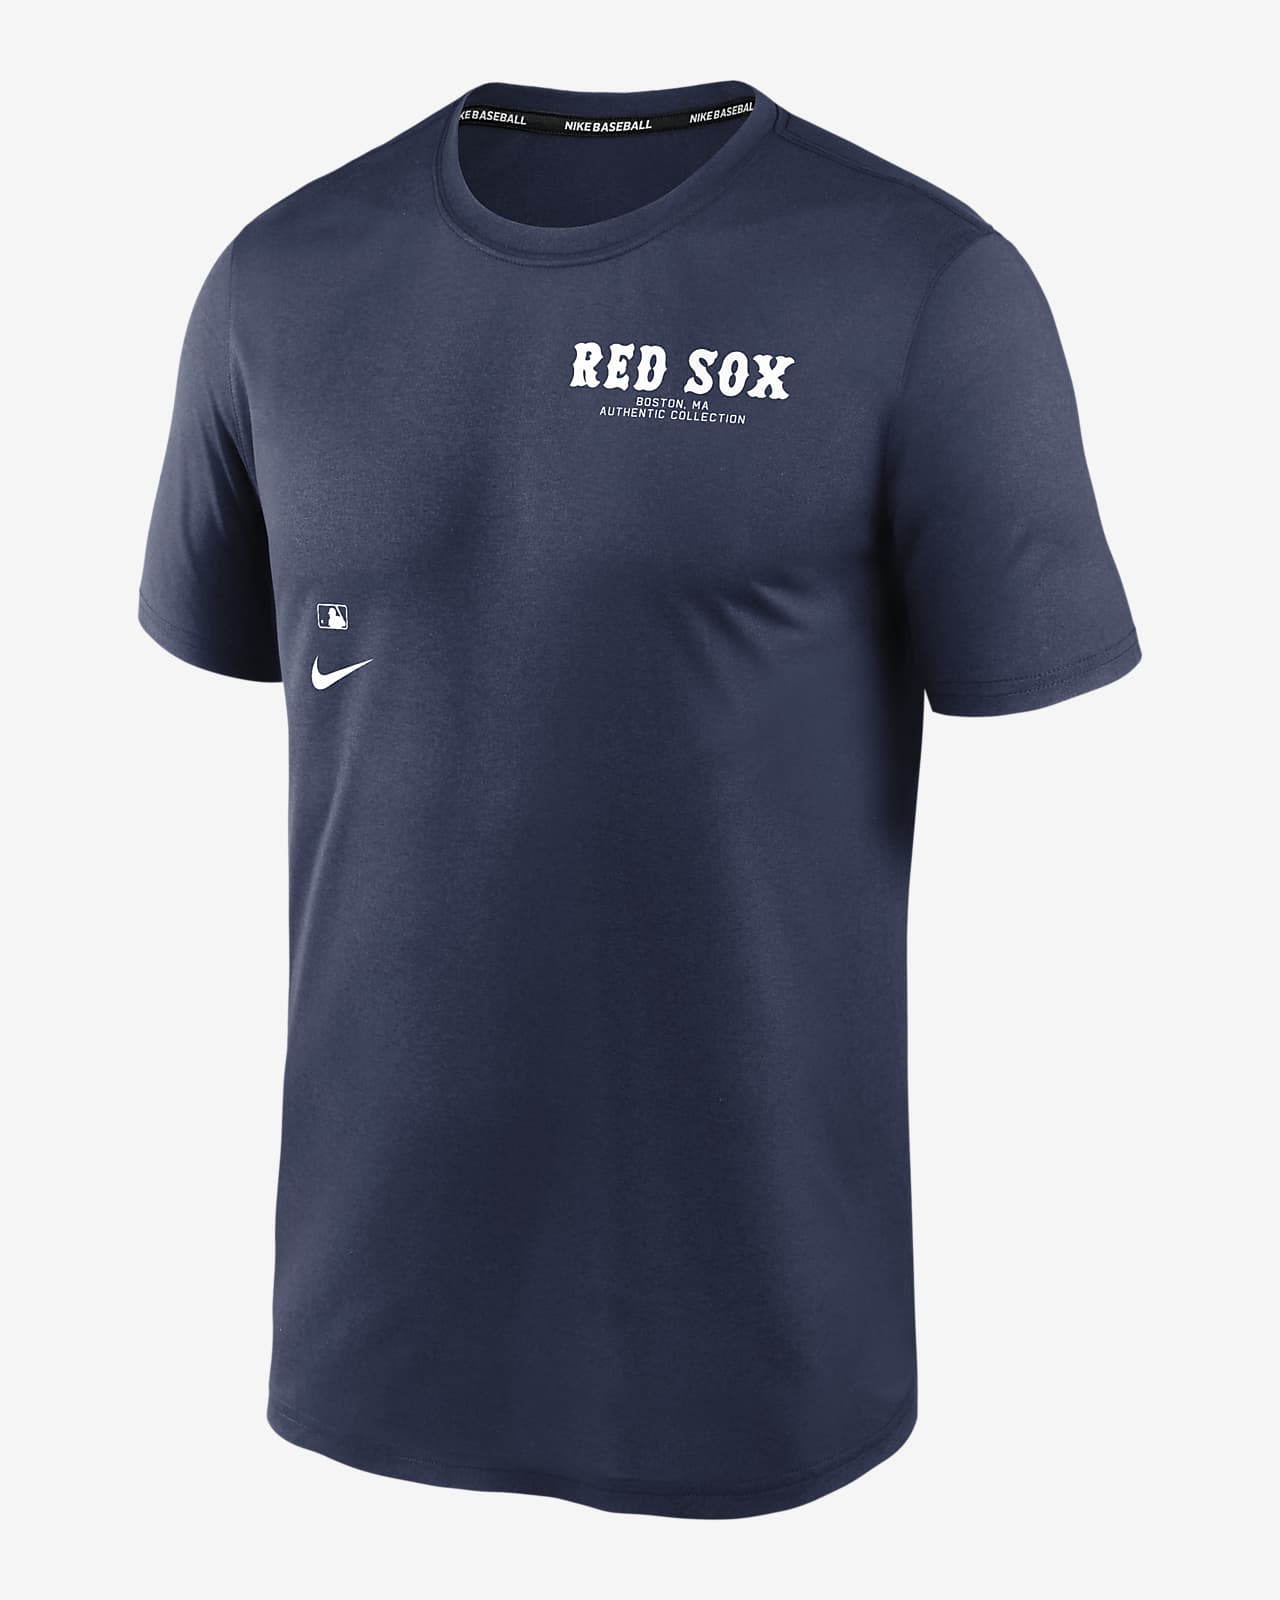 Boston Red Sox Authentic Collection Early Work Men’s Nike Dri-FIT MLB T-Shirt